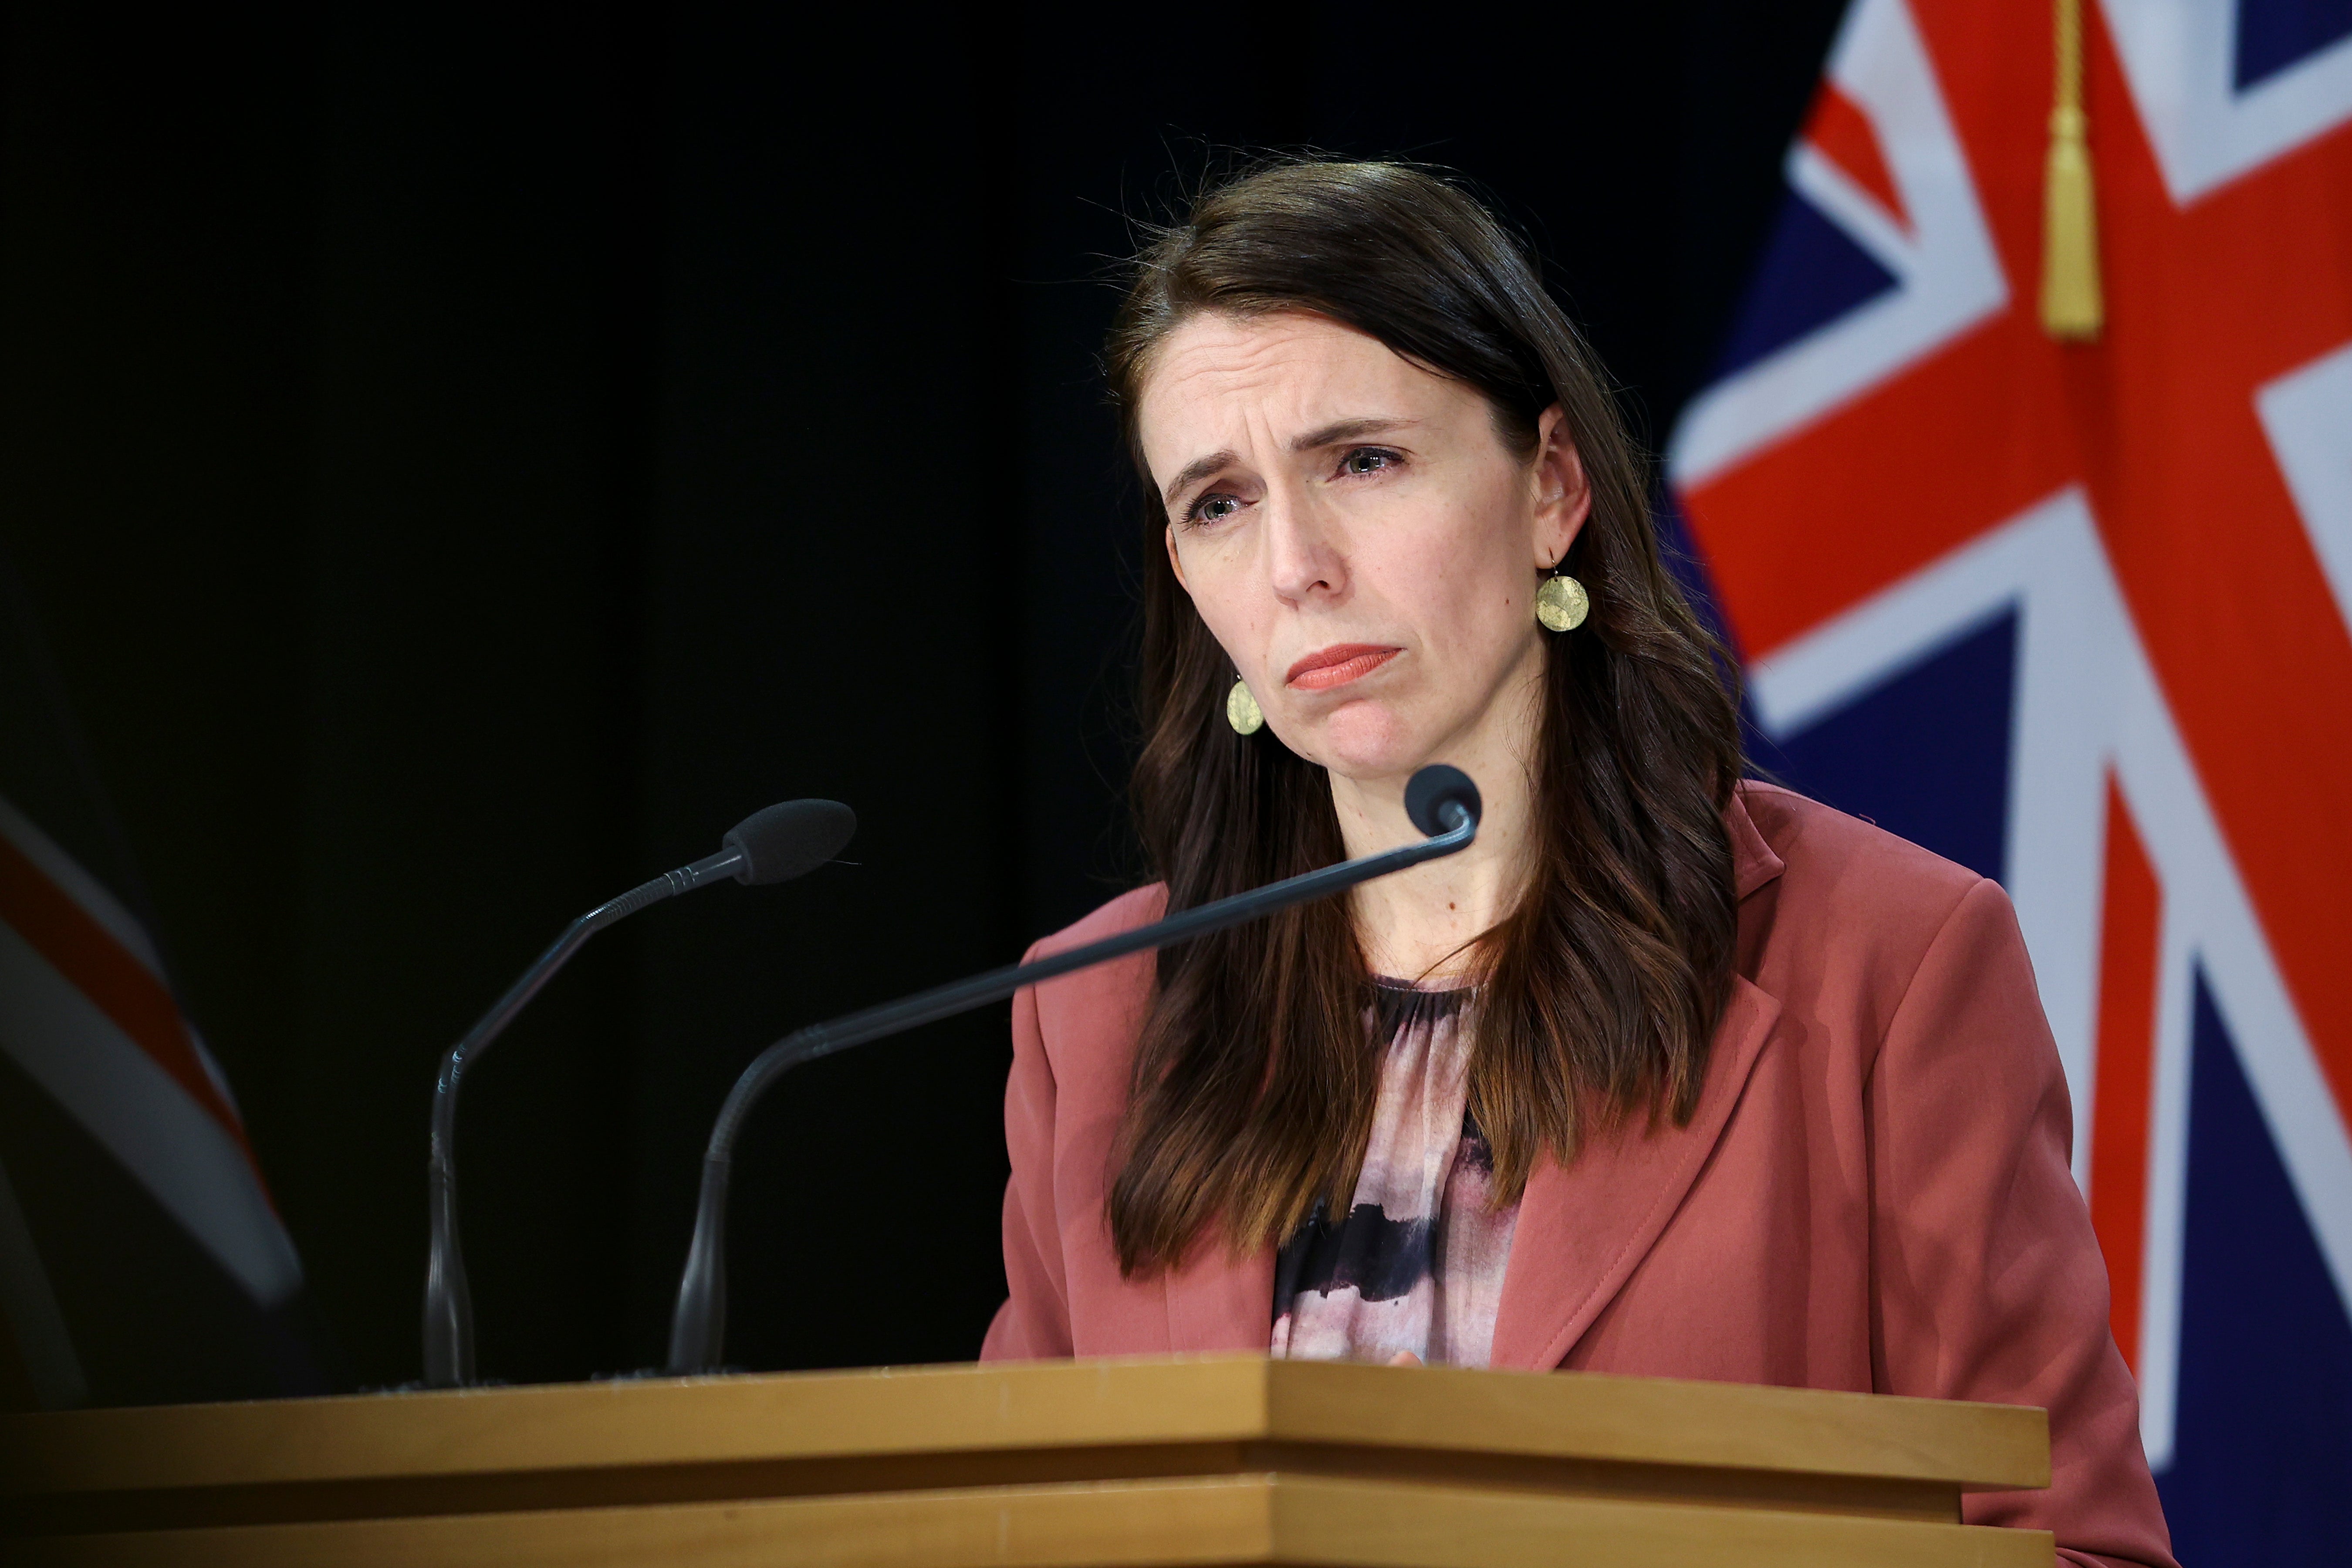 Prime Minister Jacinda Ardern said the full scale of the Delta outbreak in New Zealand is not yet known